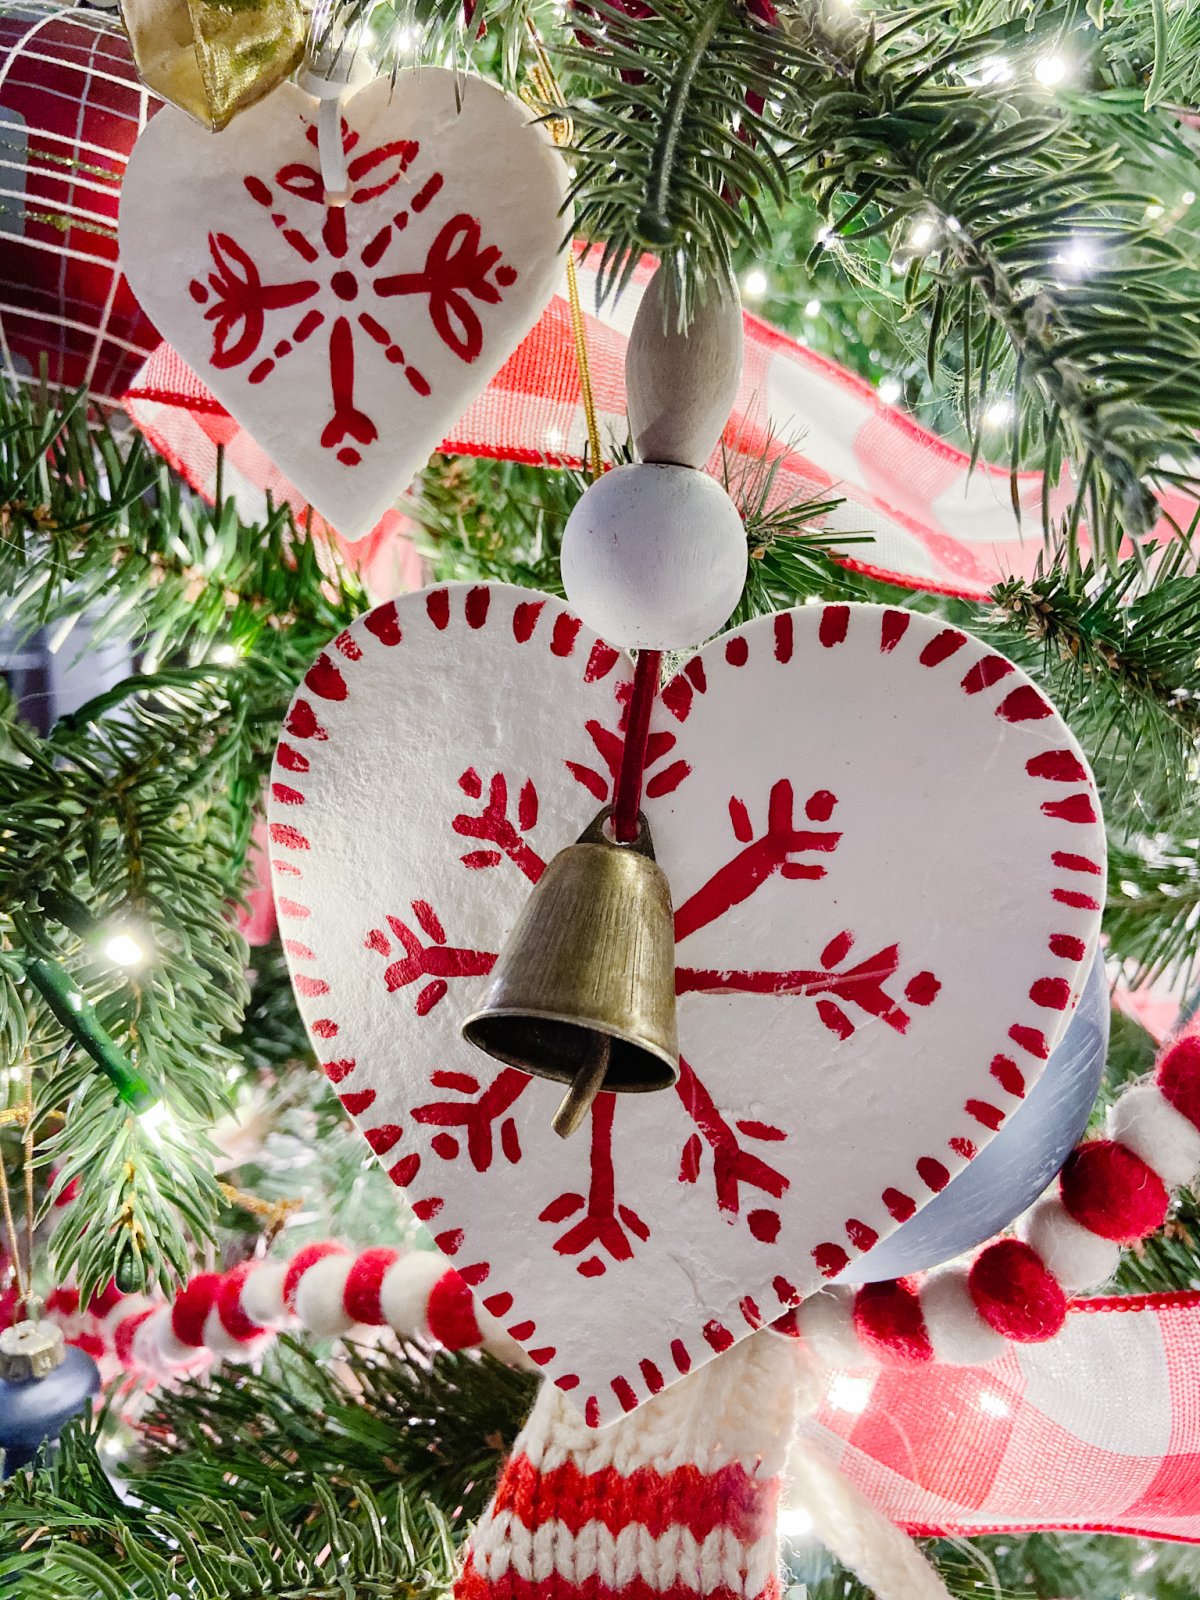 Candy Cane Themed Christmas Tree. Celebrate Christmas with a festive red and white tree filled with candy cane-themed projects, bells and felted garlands.